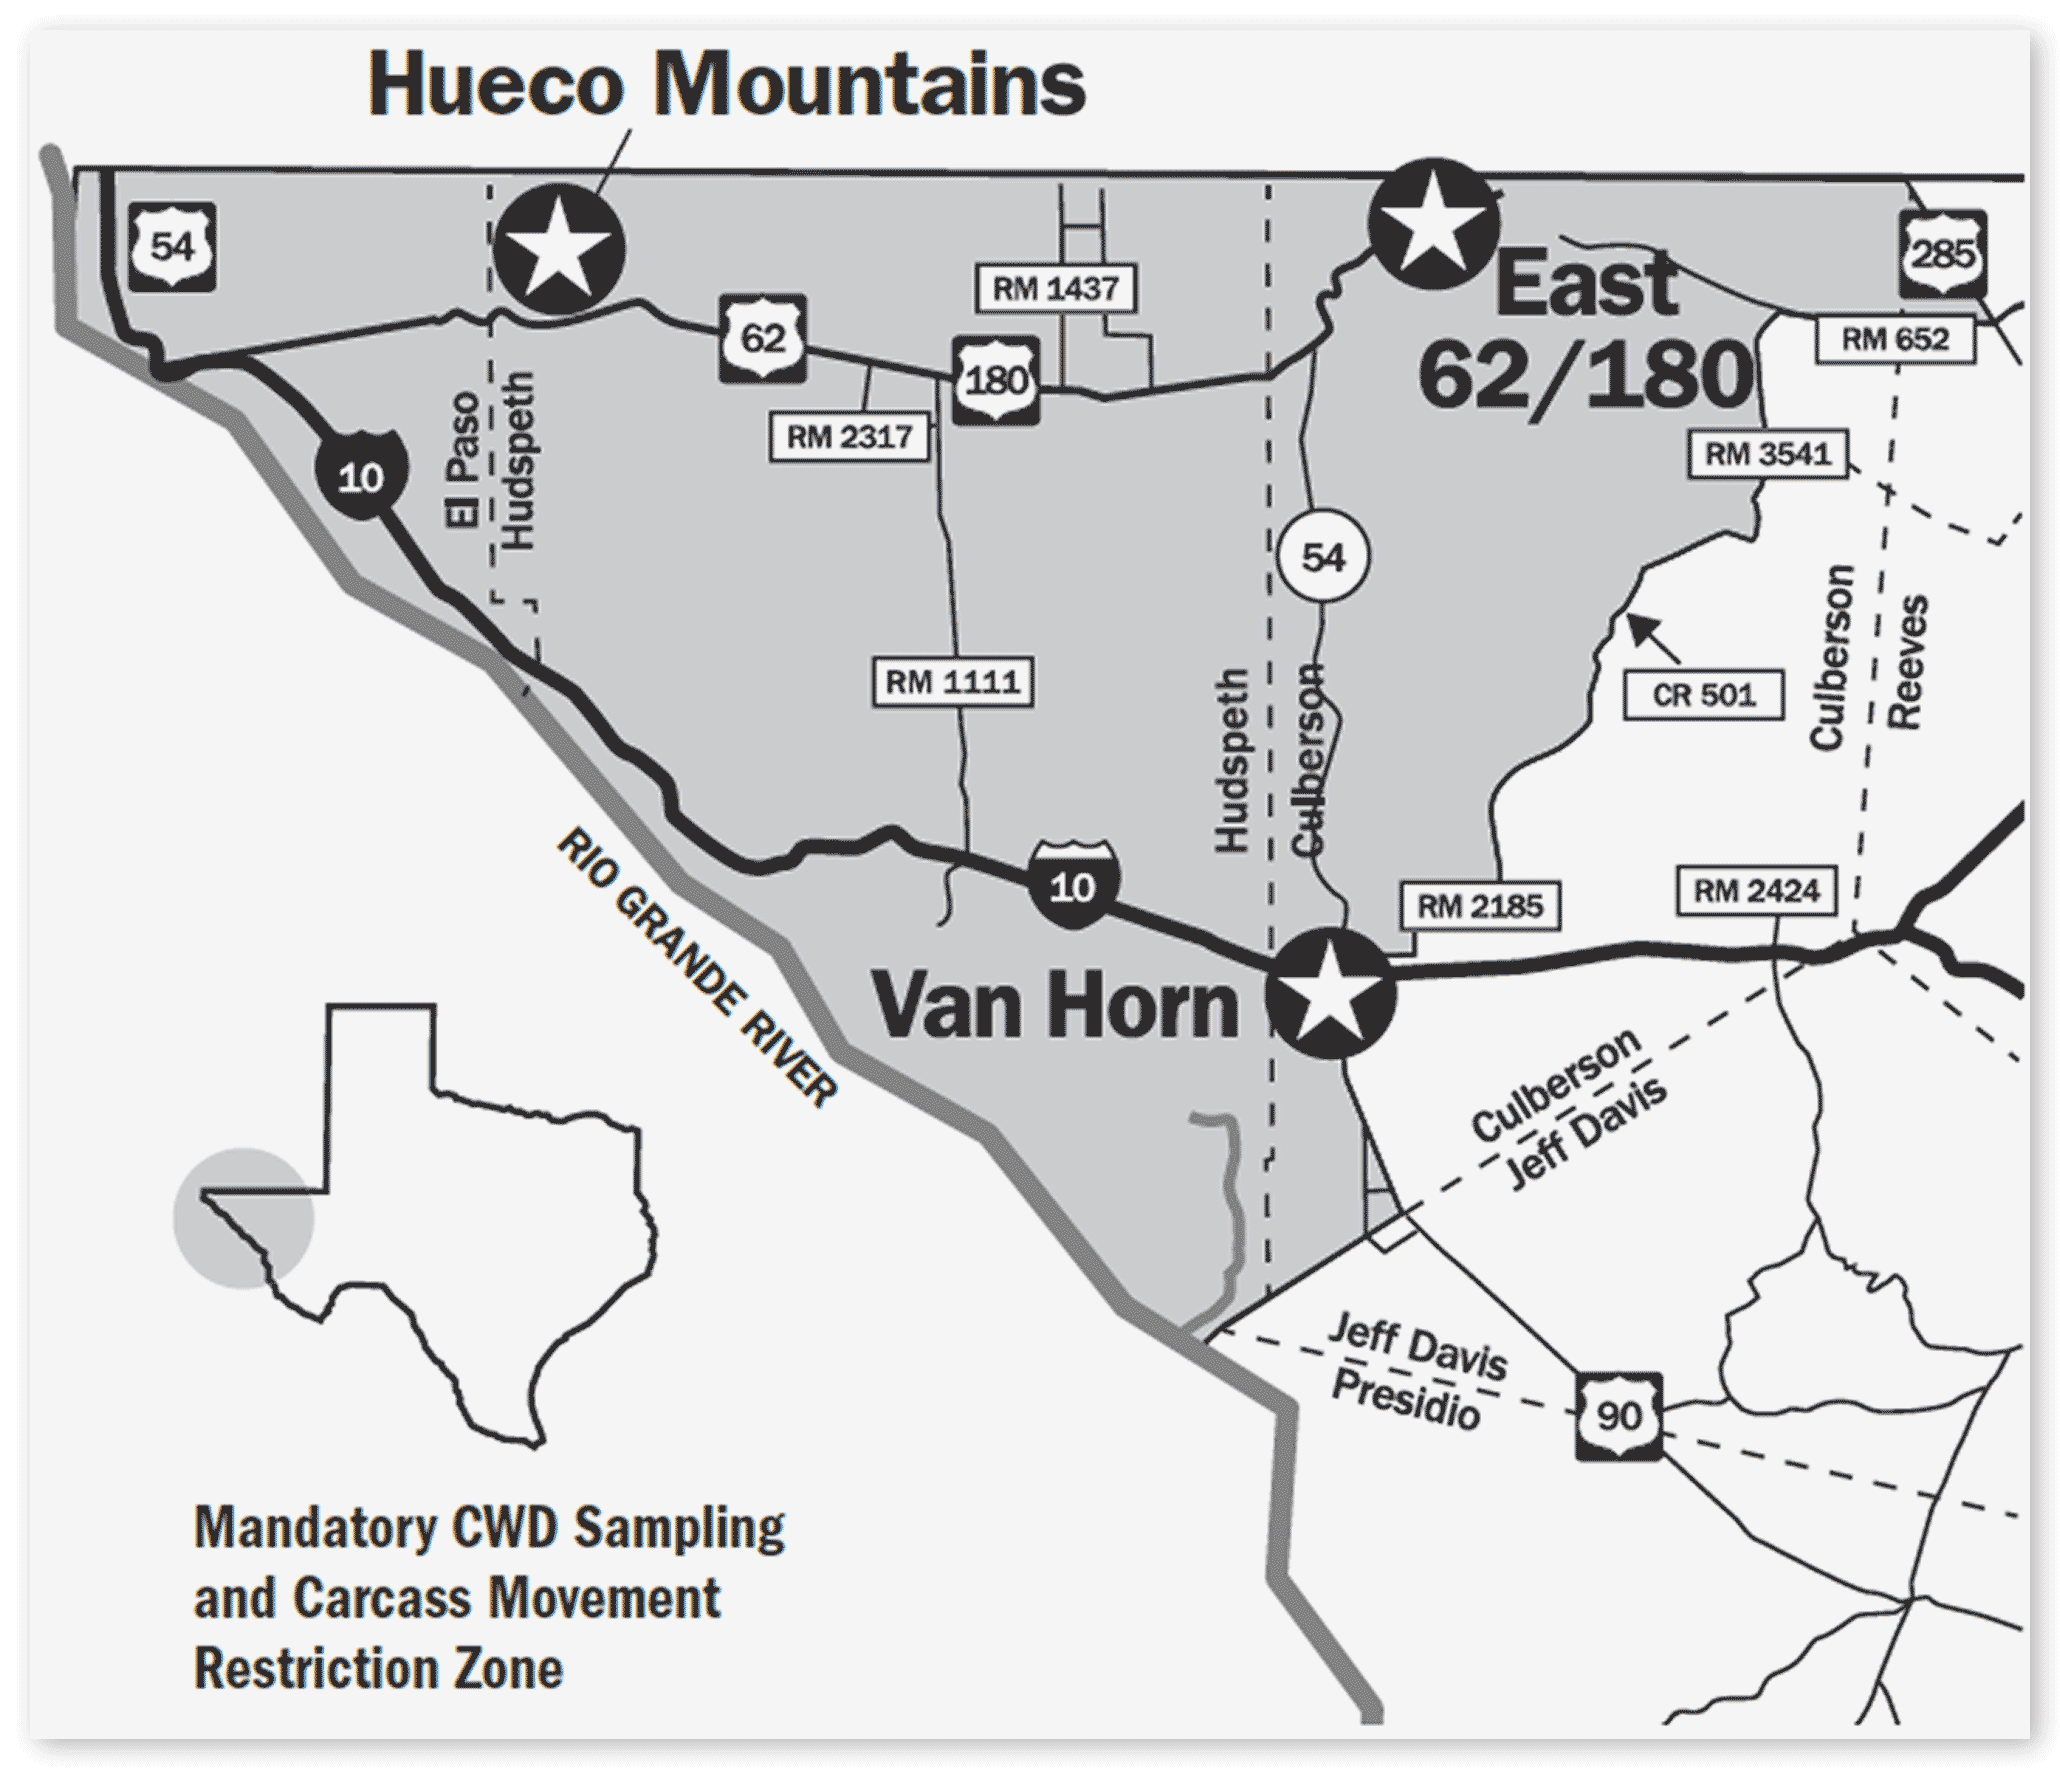 Mandatory CWD Sampling and Carcass Movement Restriction Zone in El Paso, Hudspeth, and parts of Culberson county